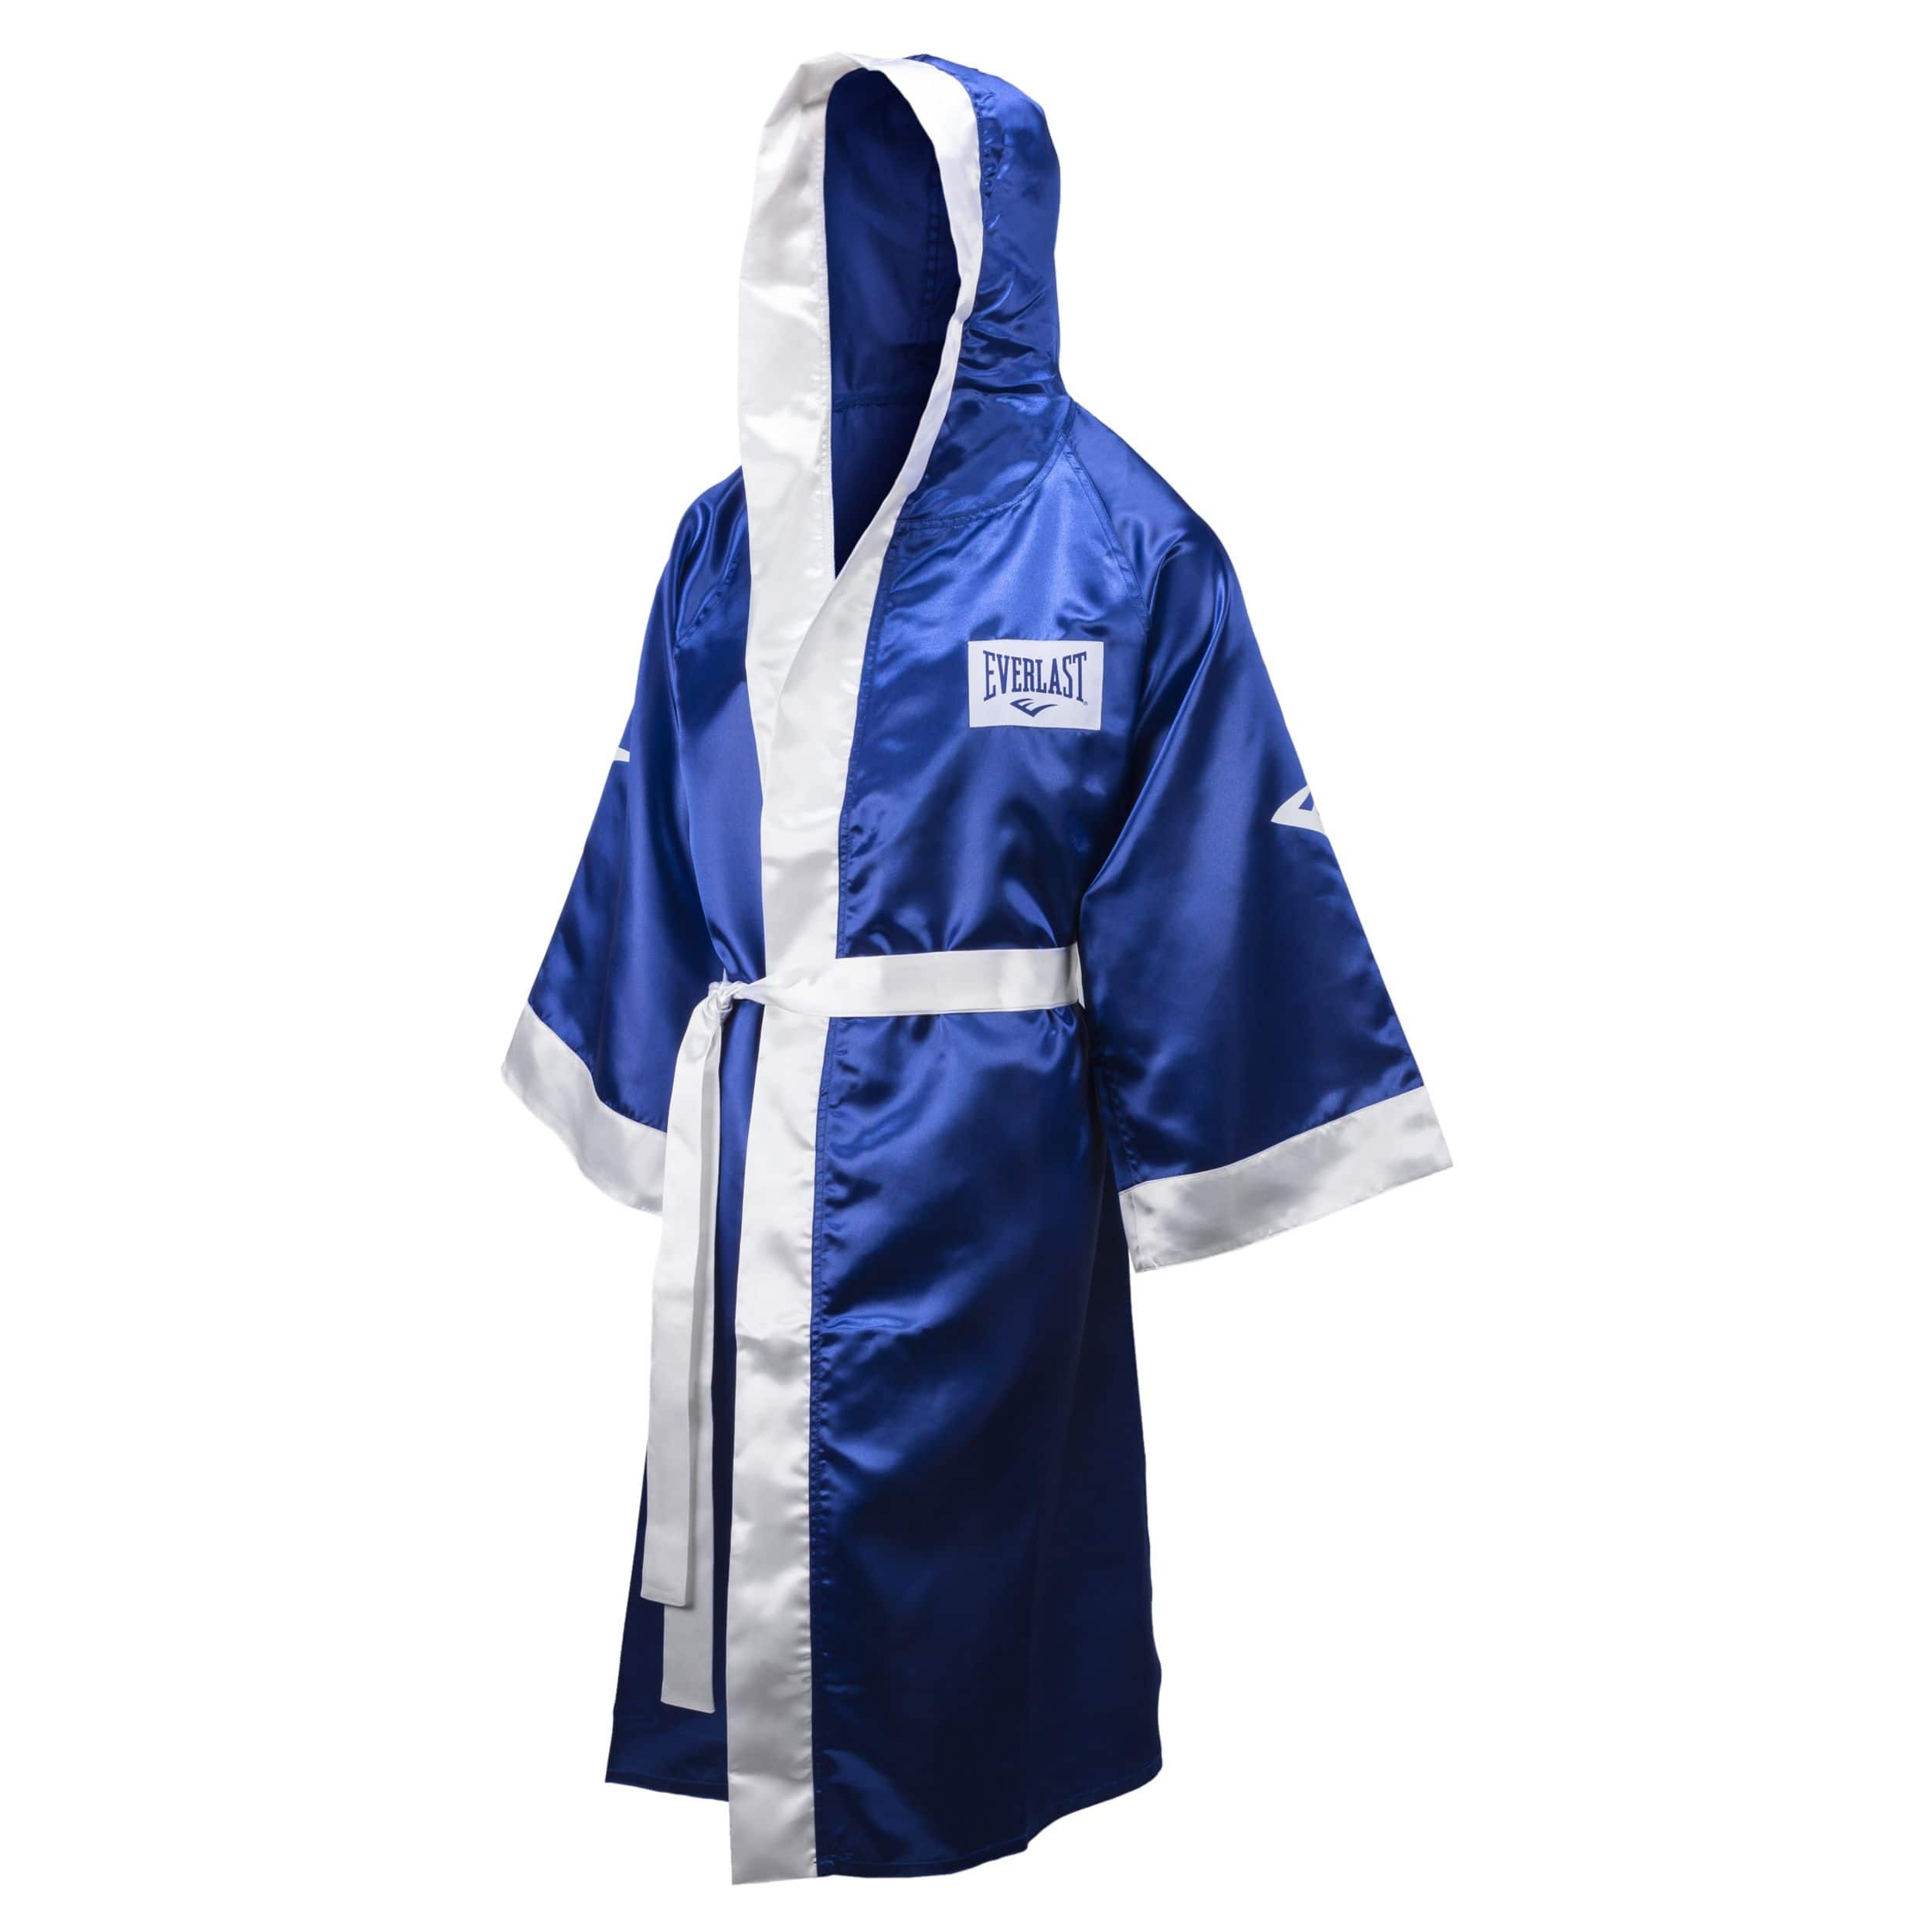 How to Make a Boxing Robe